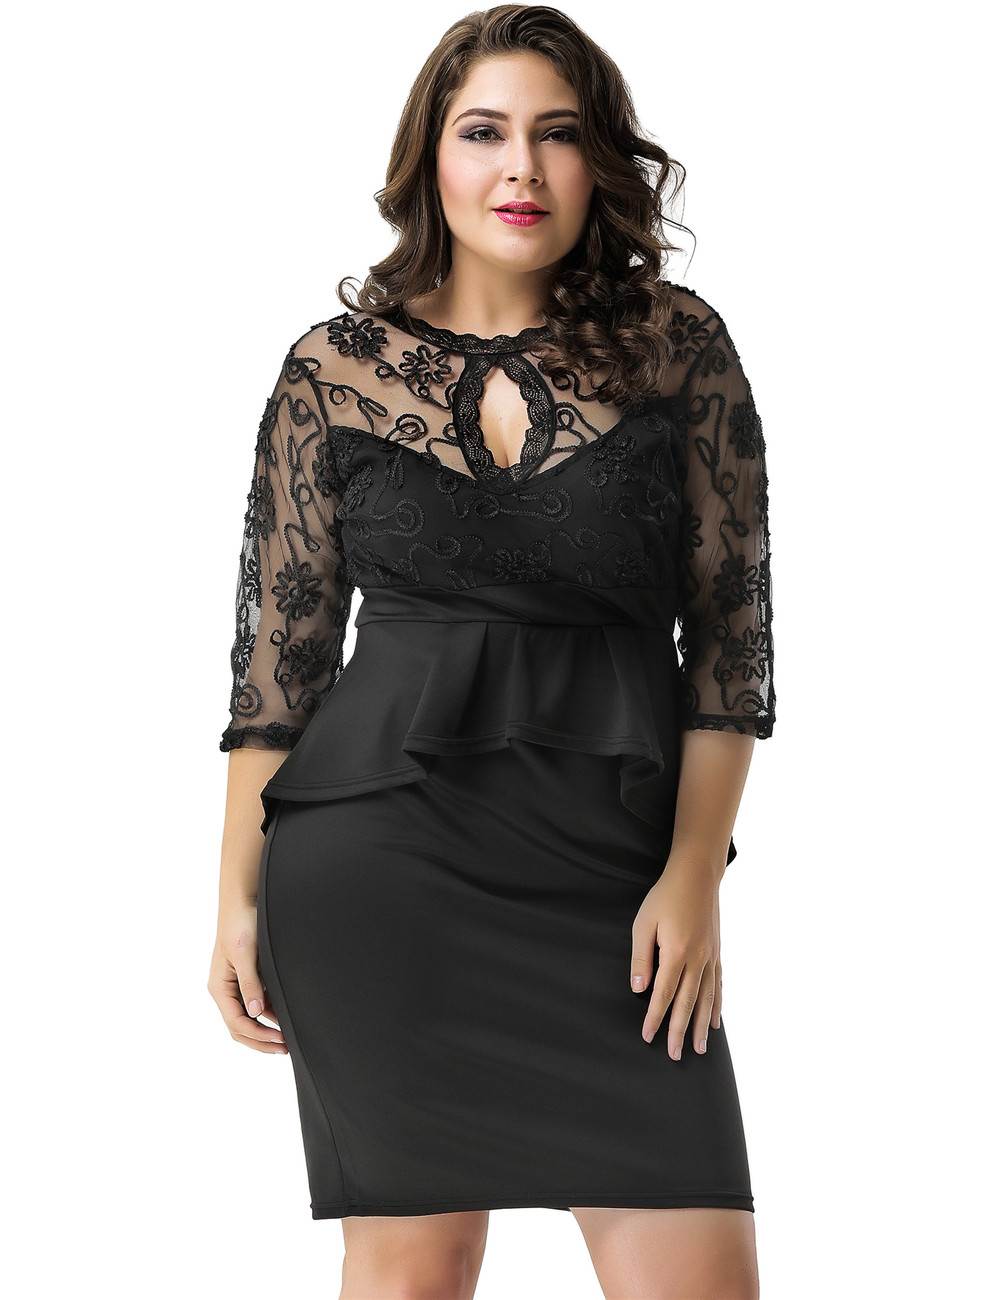 Wholesale Plus Size Lingerie With Discount Up To 60% Off | OhyeahLady.com